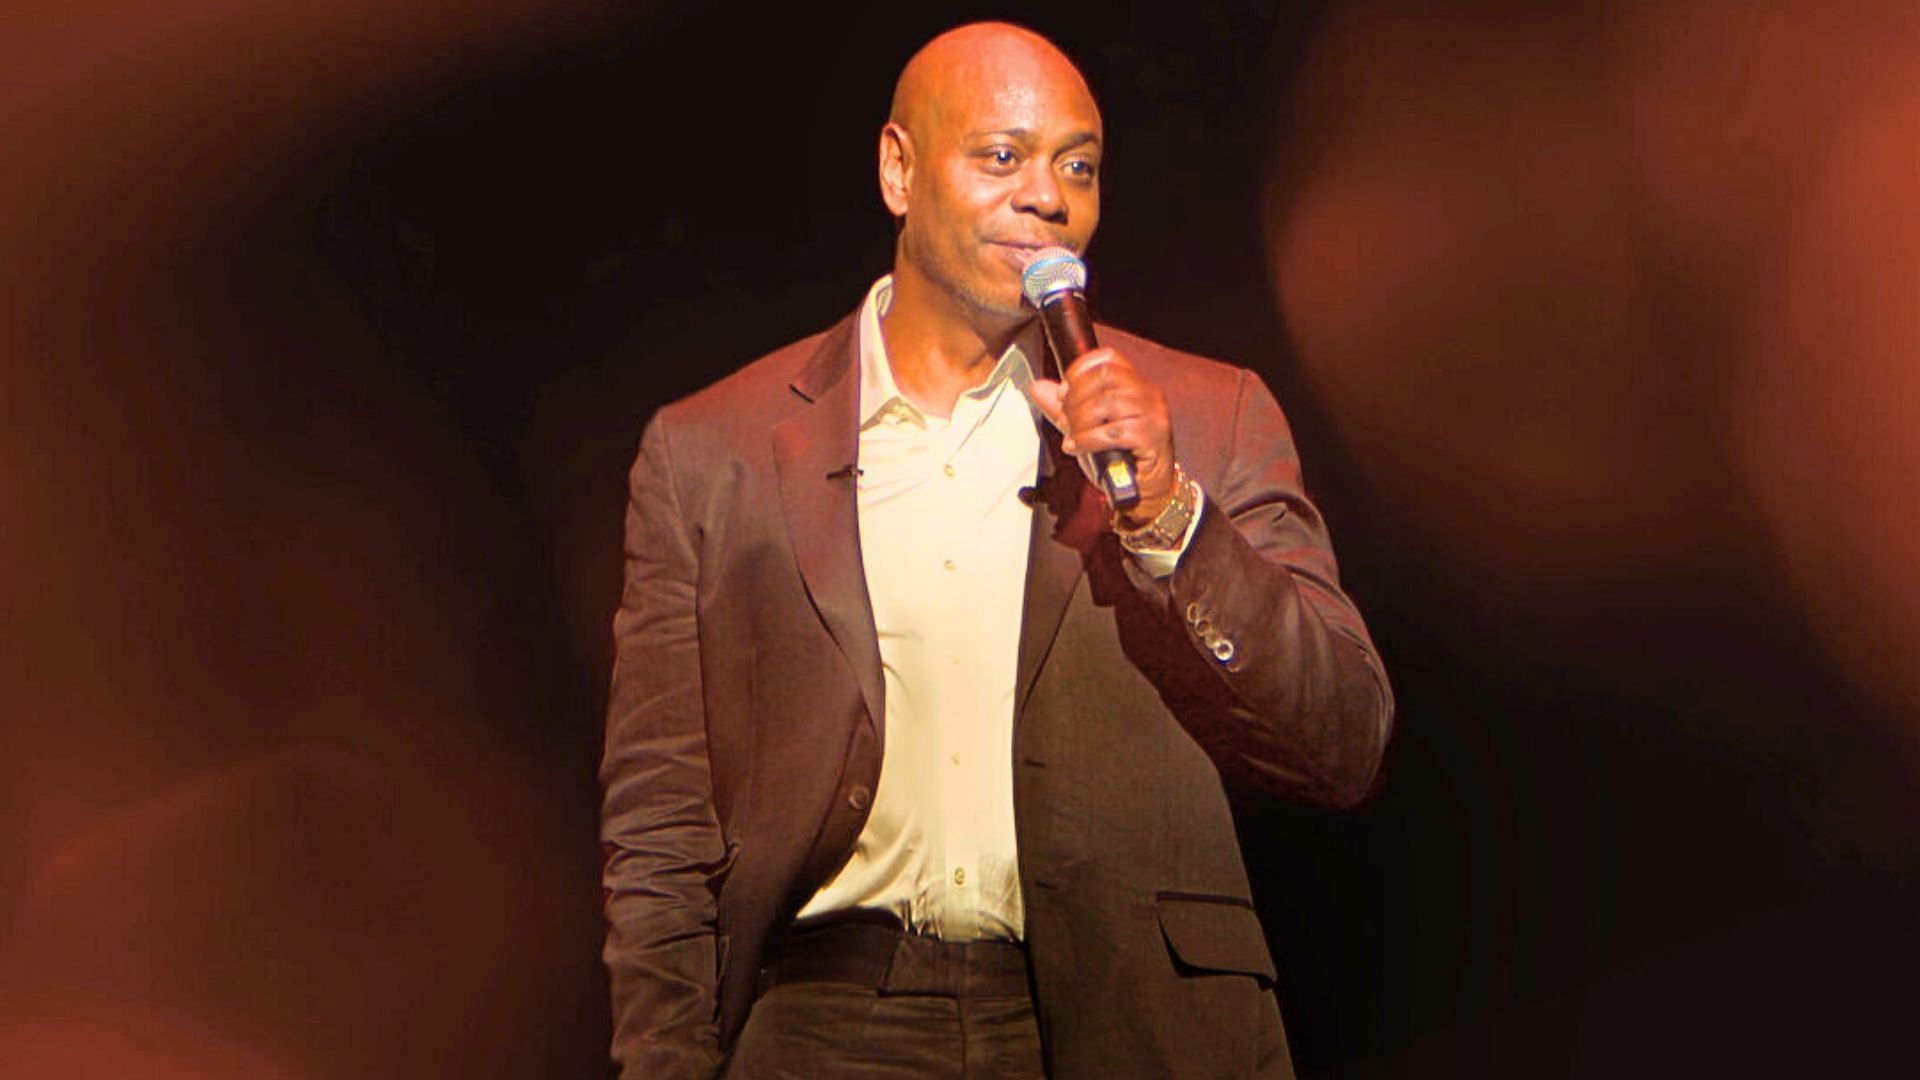 Isaiah Lee, a 23-year-old, attacked comedian Dave Chappelle in 2022 (Image via Netflix)